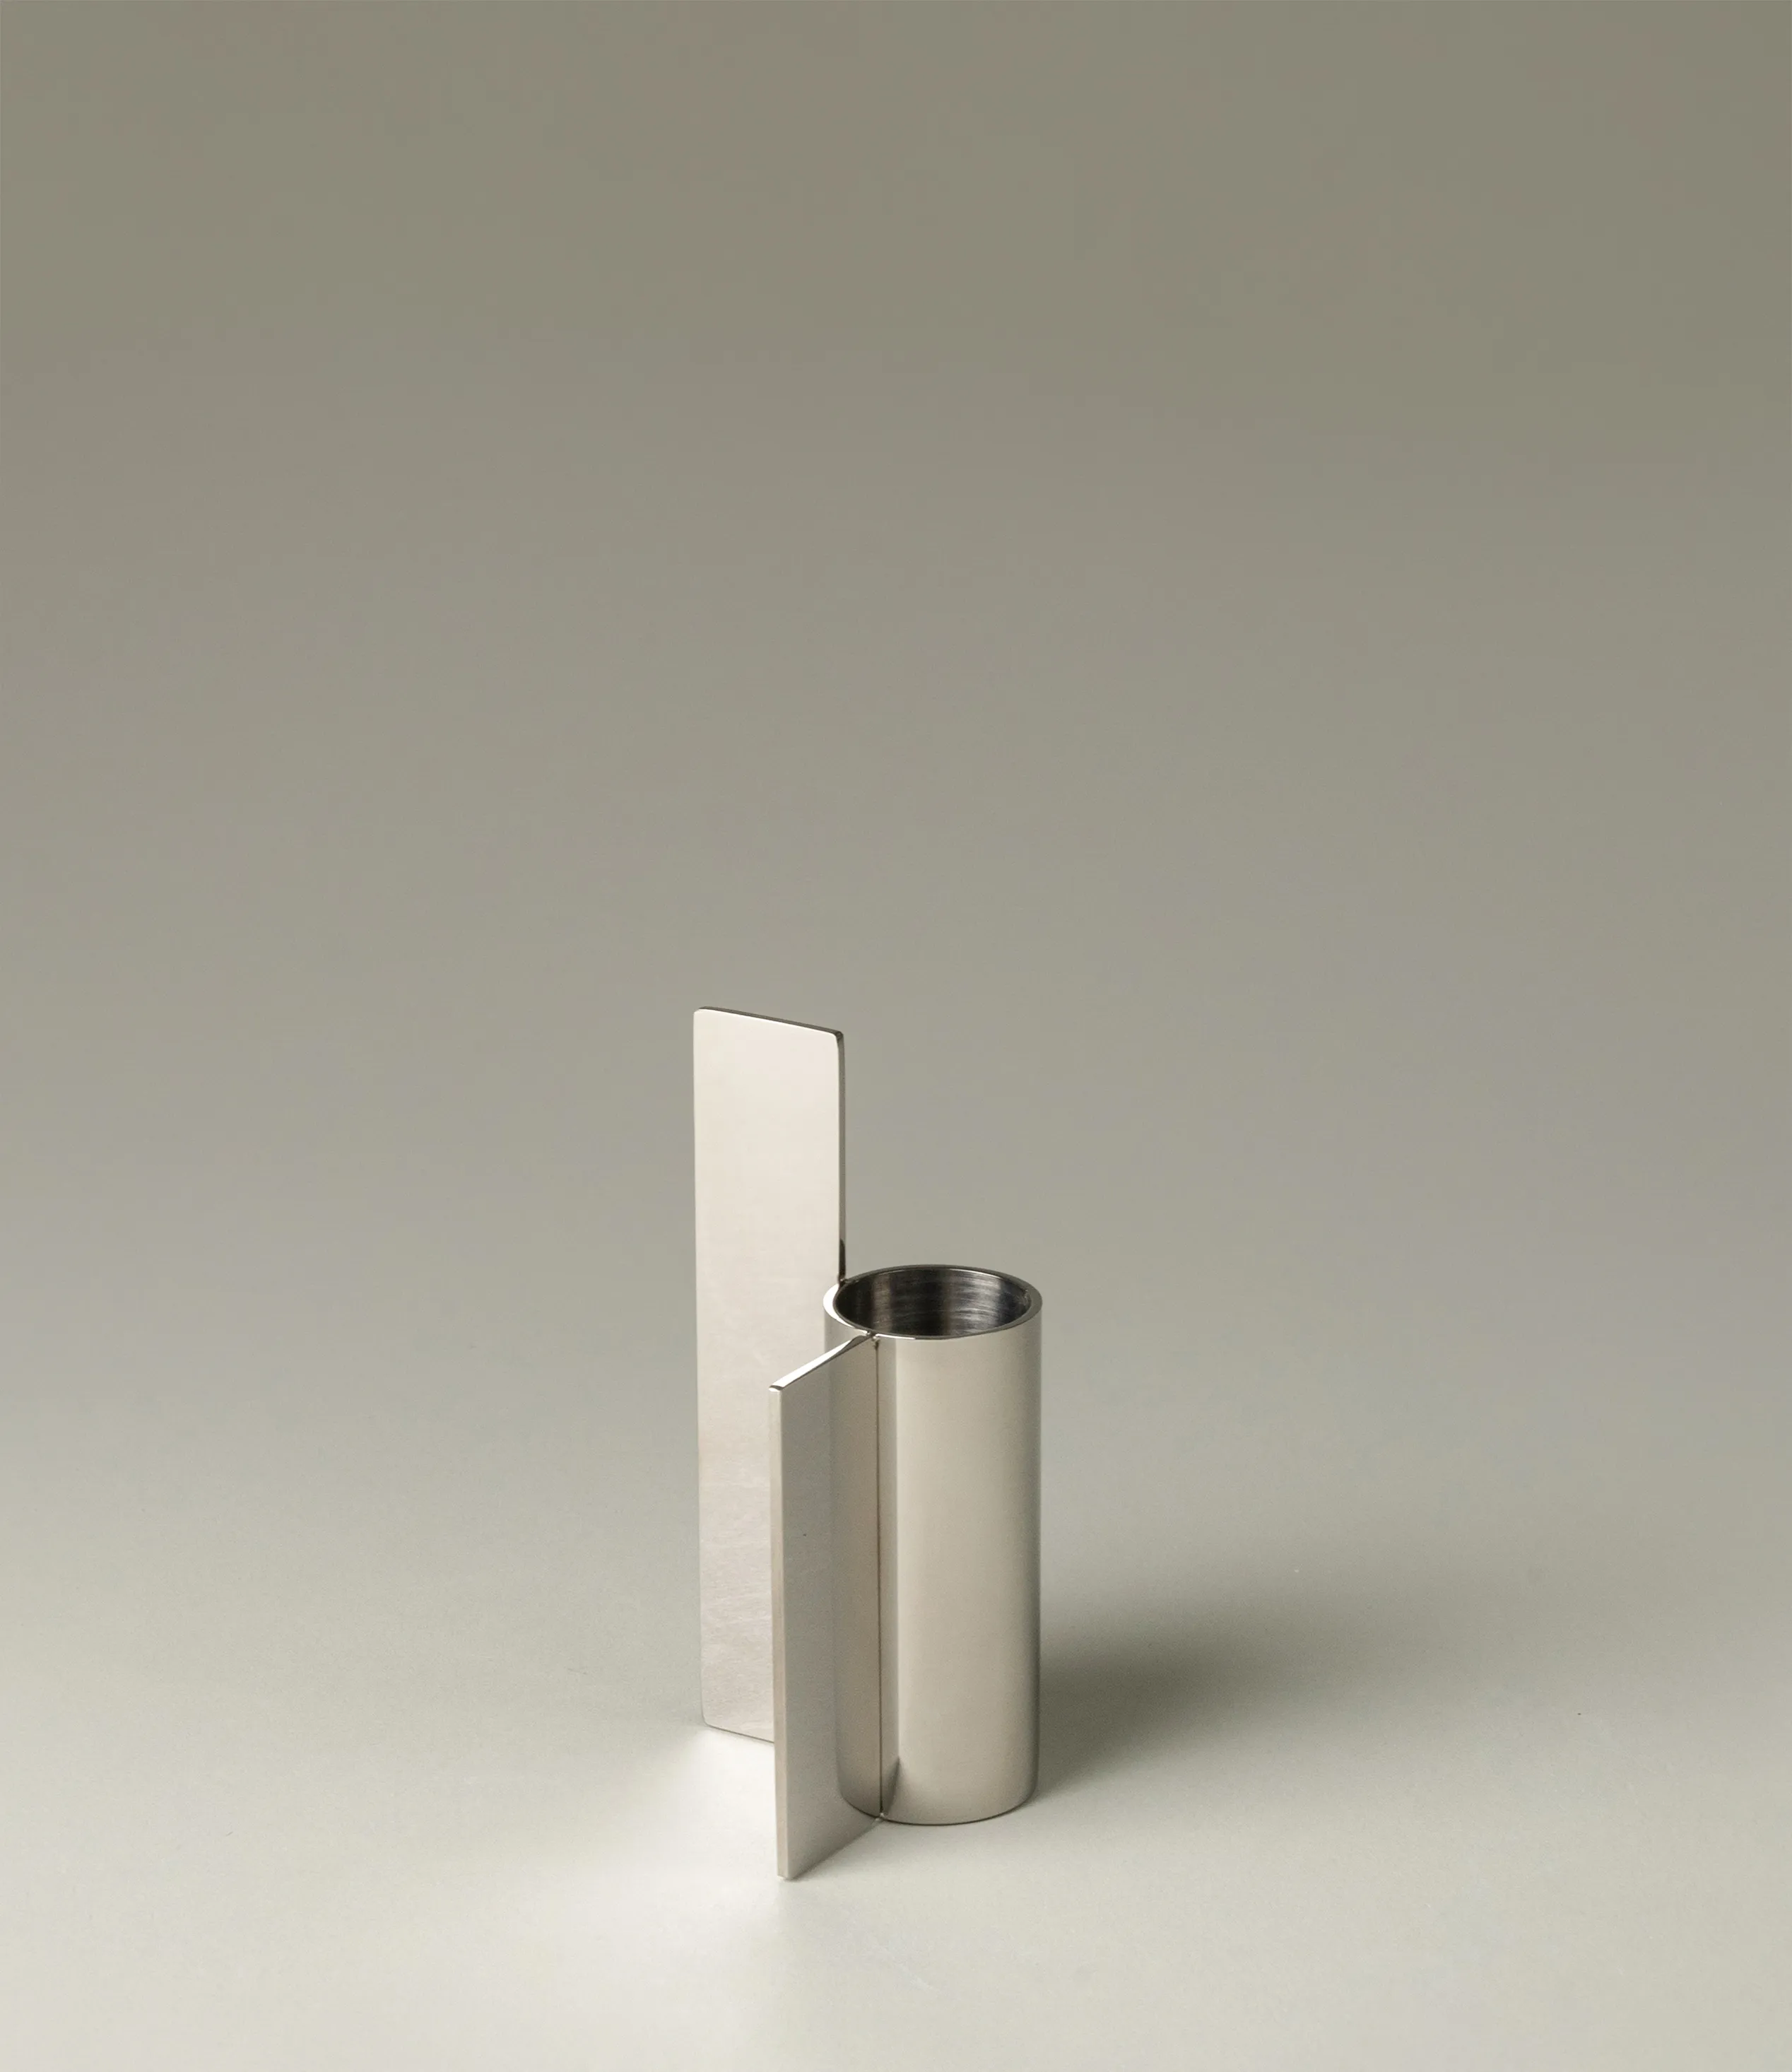 Icon Iysestage 03 from Stences is a candleholder made for taper candles. This picture shows the chrome variant of this item. The steel material has a glossy surface which emphasize the soft geometric shapes of the product in question.